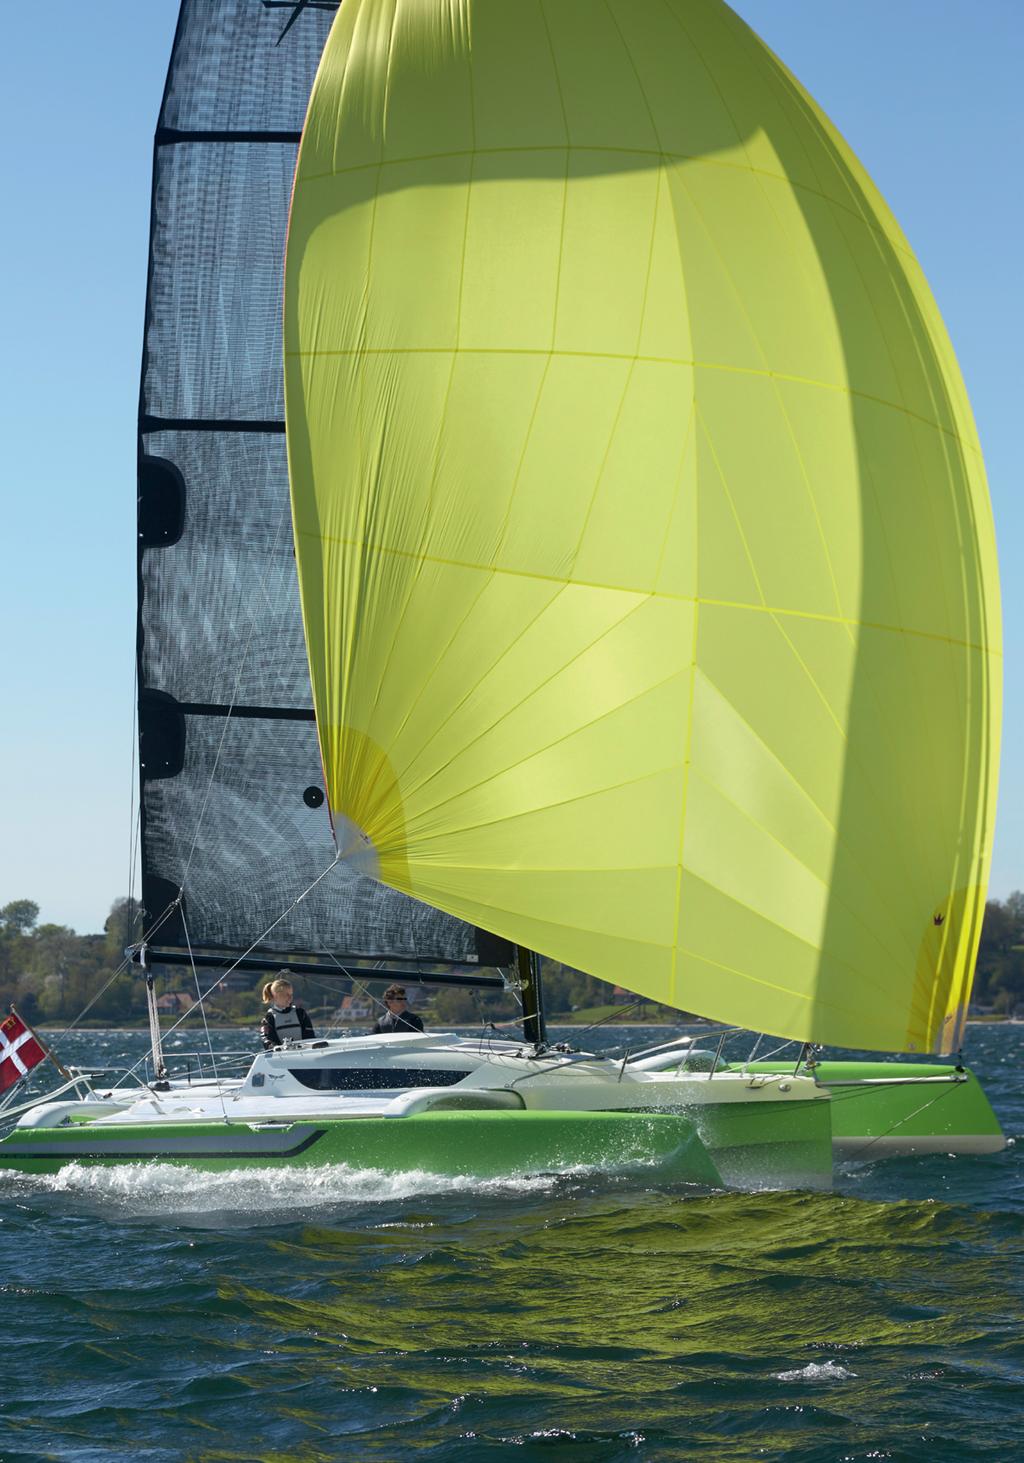 DESIGN & PERFORMANCE The all-new Dragonfly 25 is a high-performance trailer-sailer, for sport and racing sailors looking for an exhilarating lightweight trimaran which retains comfortable